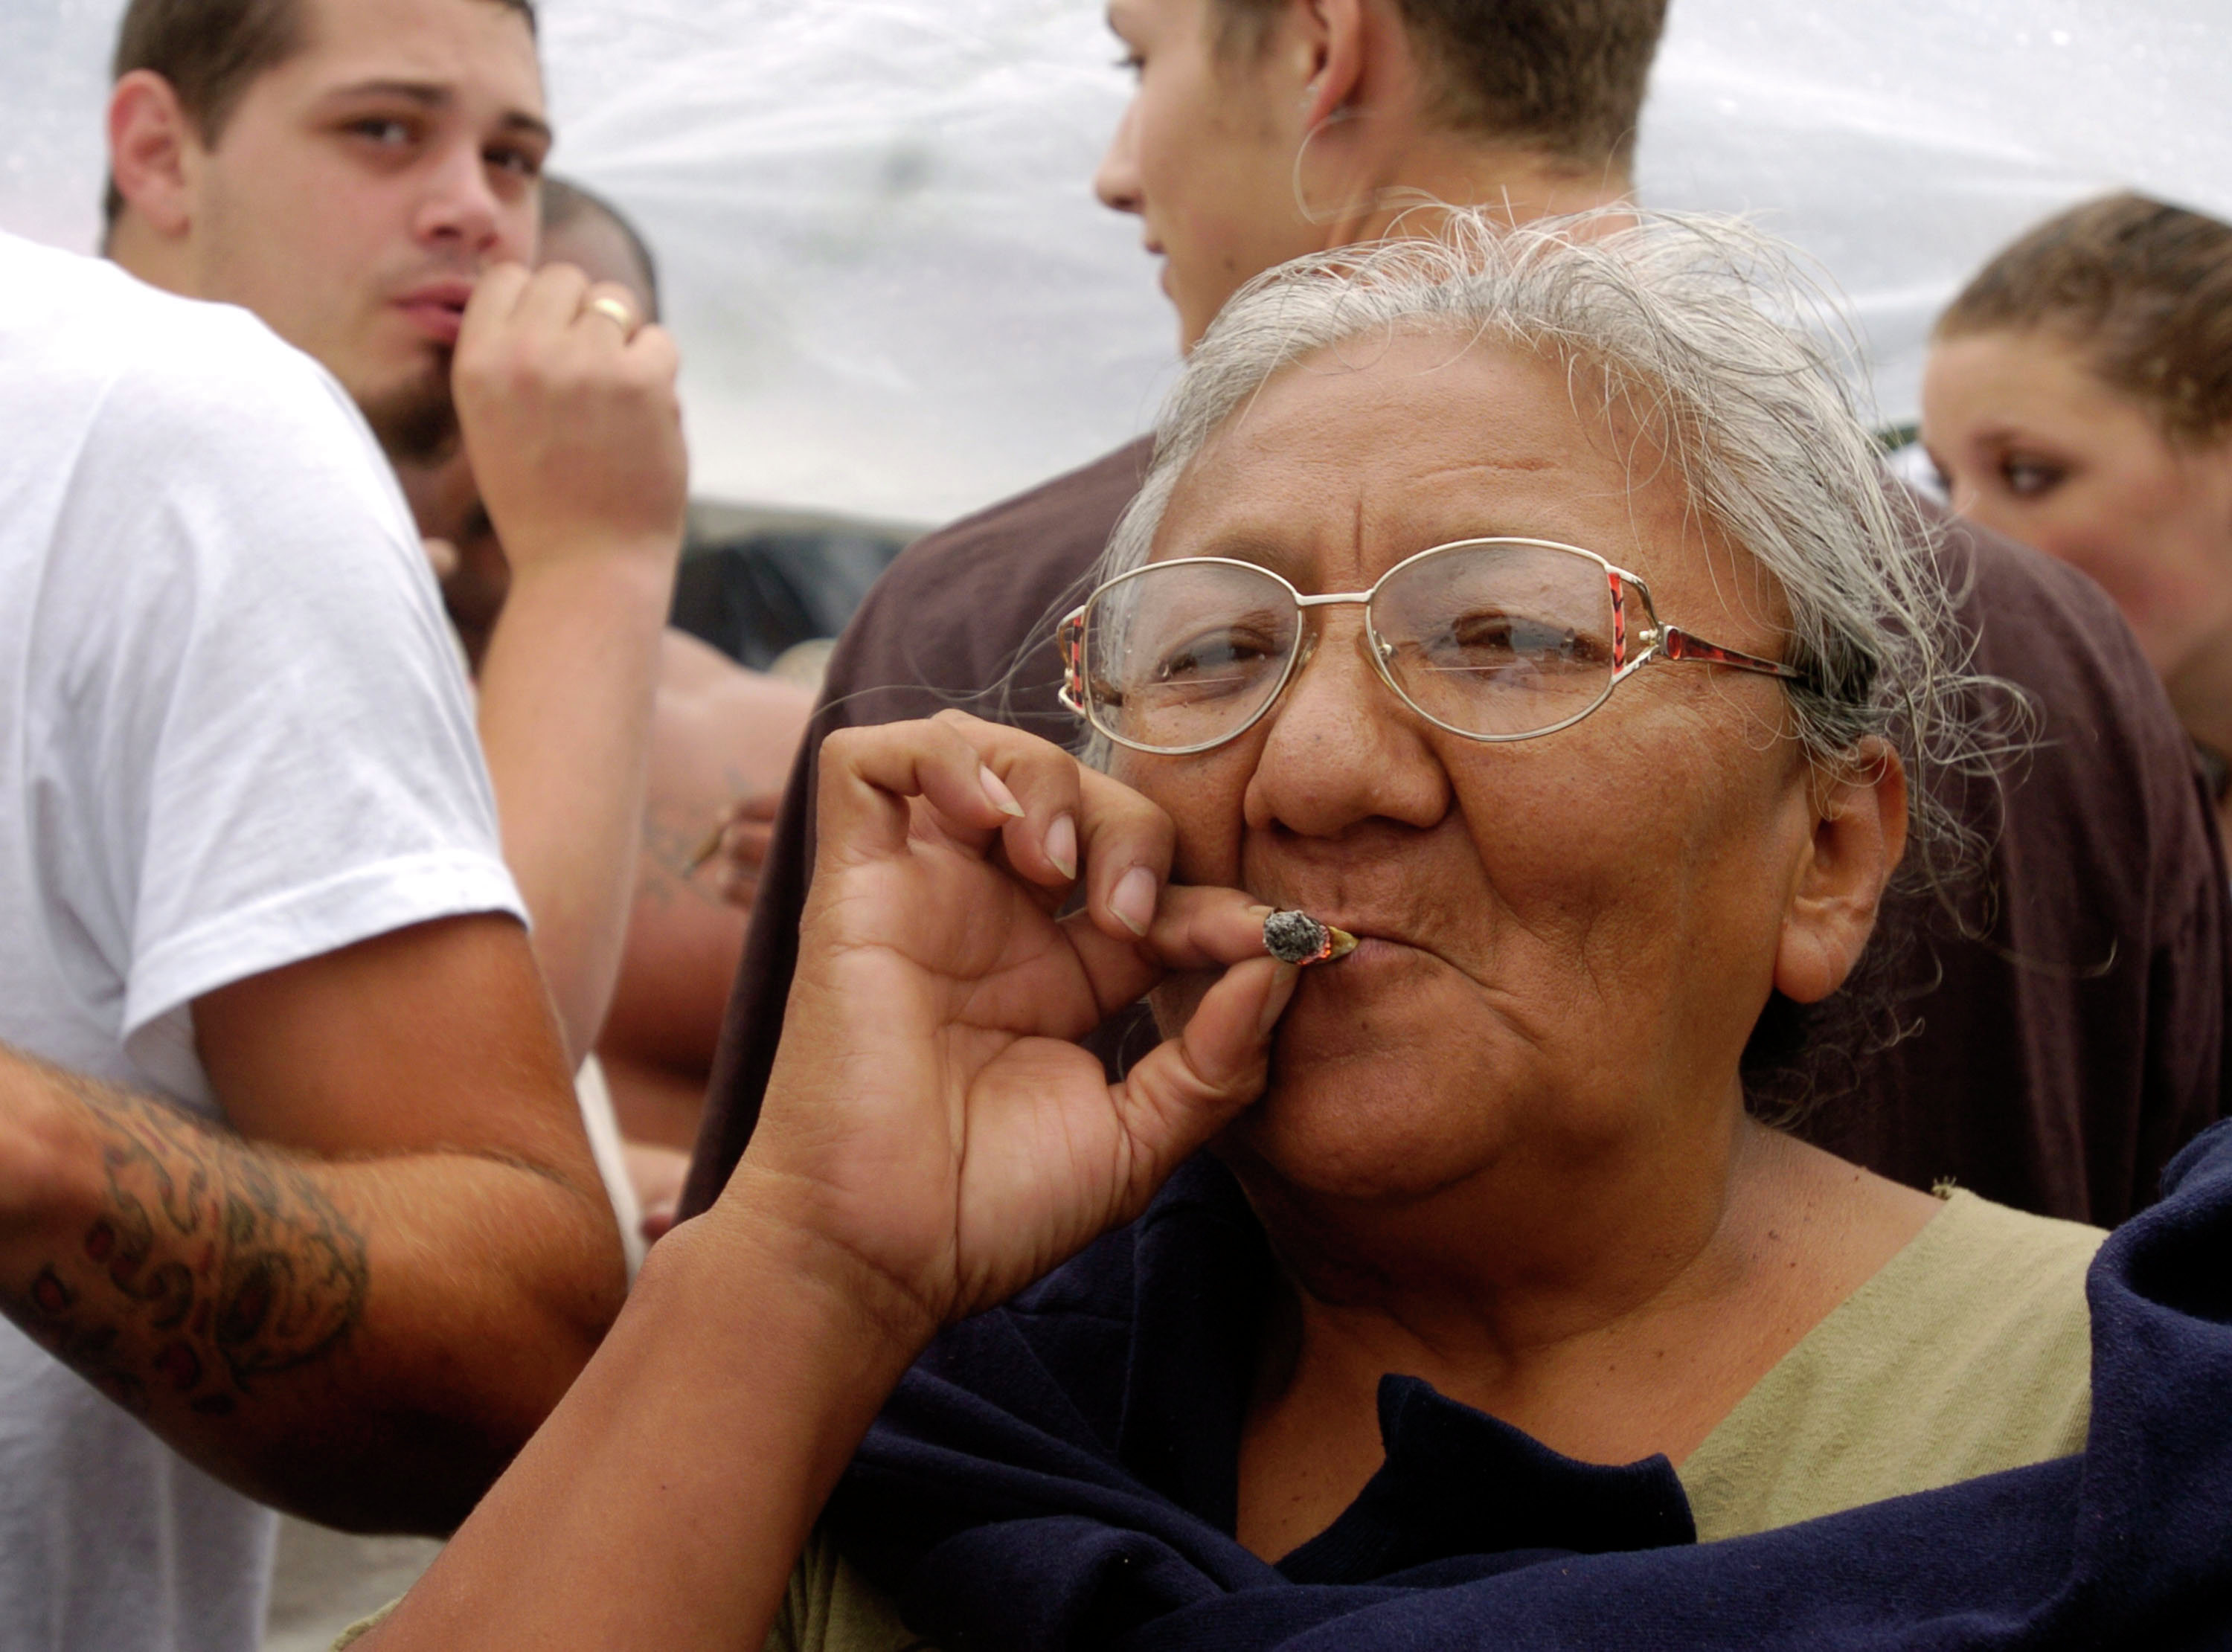 Cannabis still poses risks for young and old alike